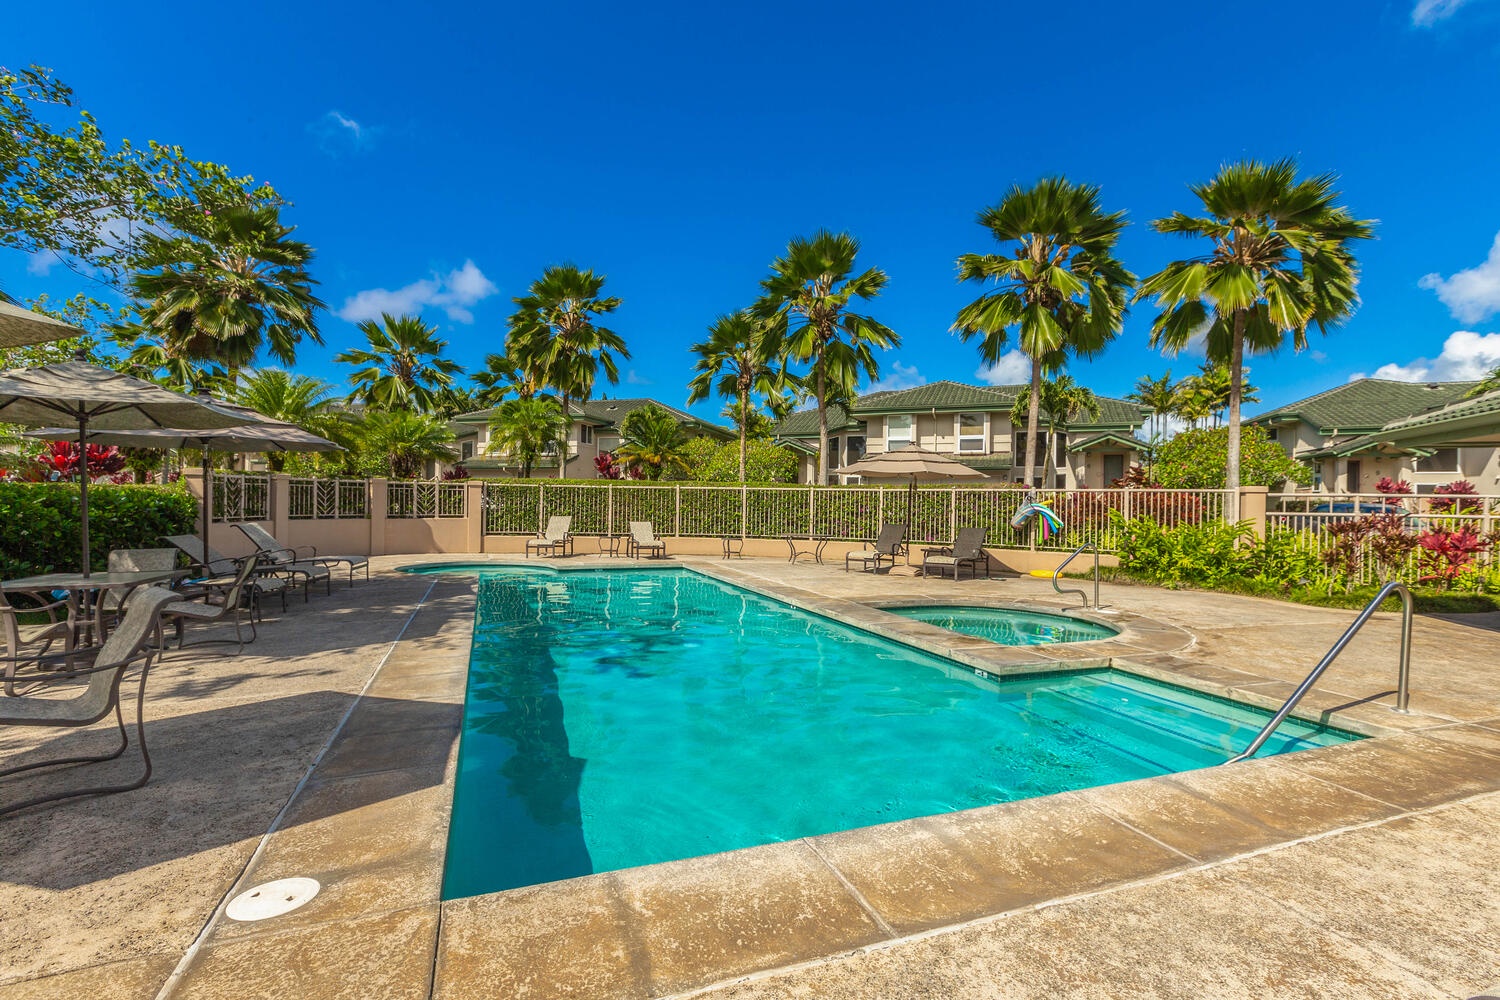 Princeville Vacation Rentals, Sea Glass - Take a plunge in the community pool with sun loungers by the side.